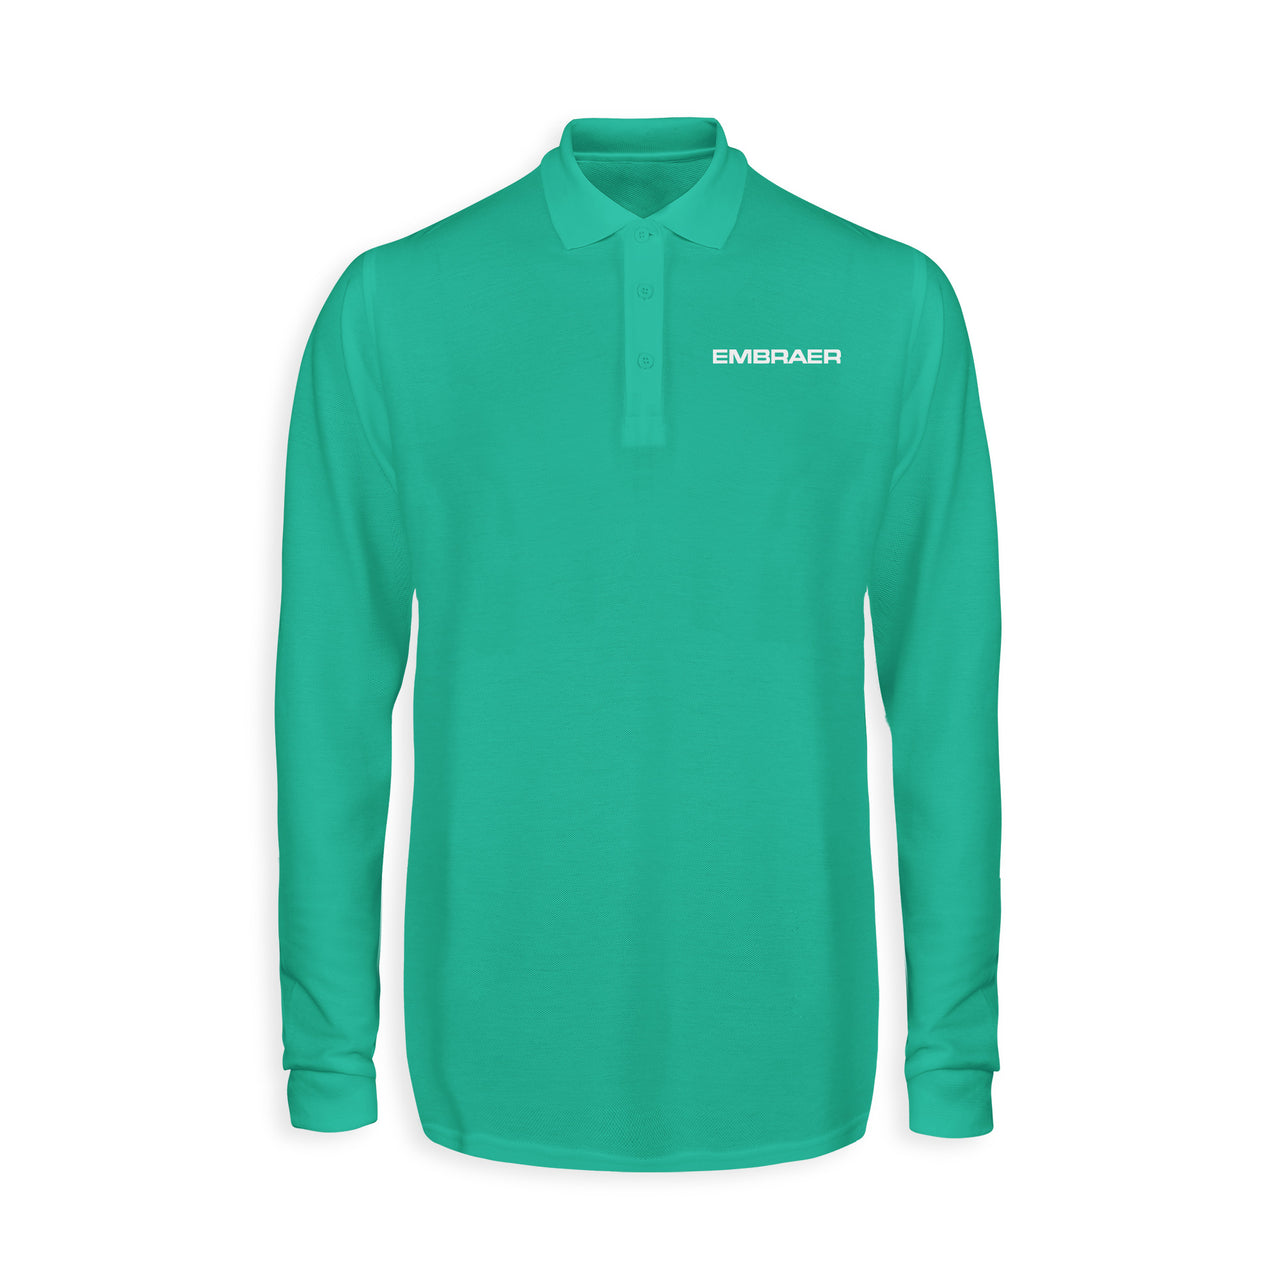 Embraer & Text Designed Long Sleeve Polo T-Shirts